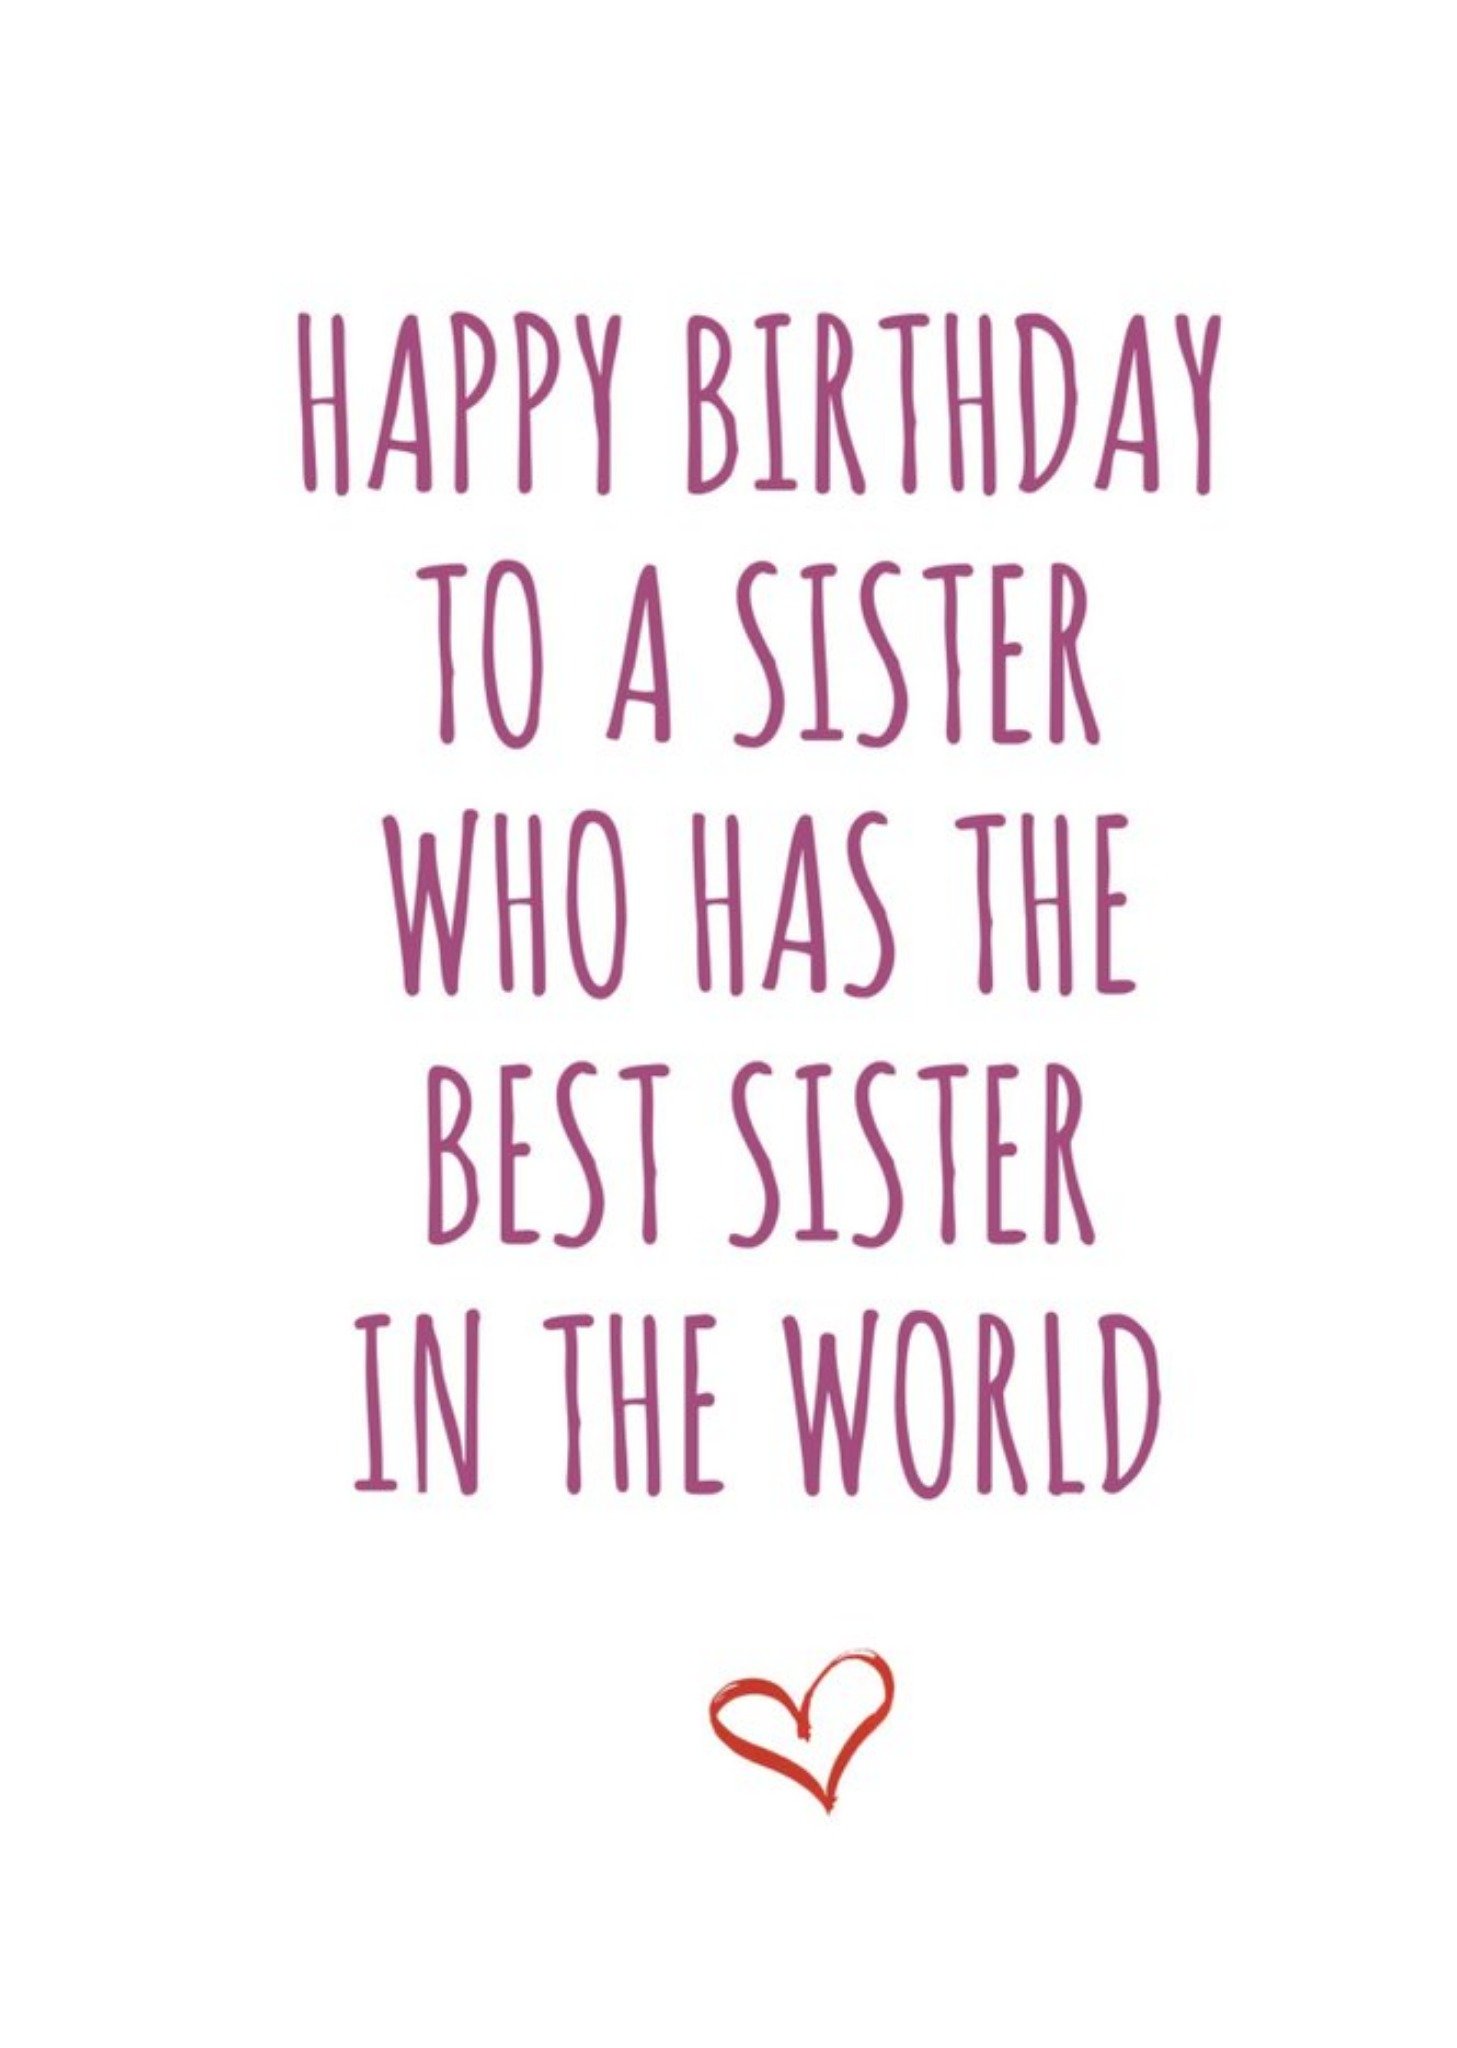 Banter King Typographical Funny Happy Birthday To A Sister Who Has The Best Sister In The World Card